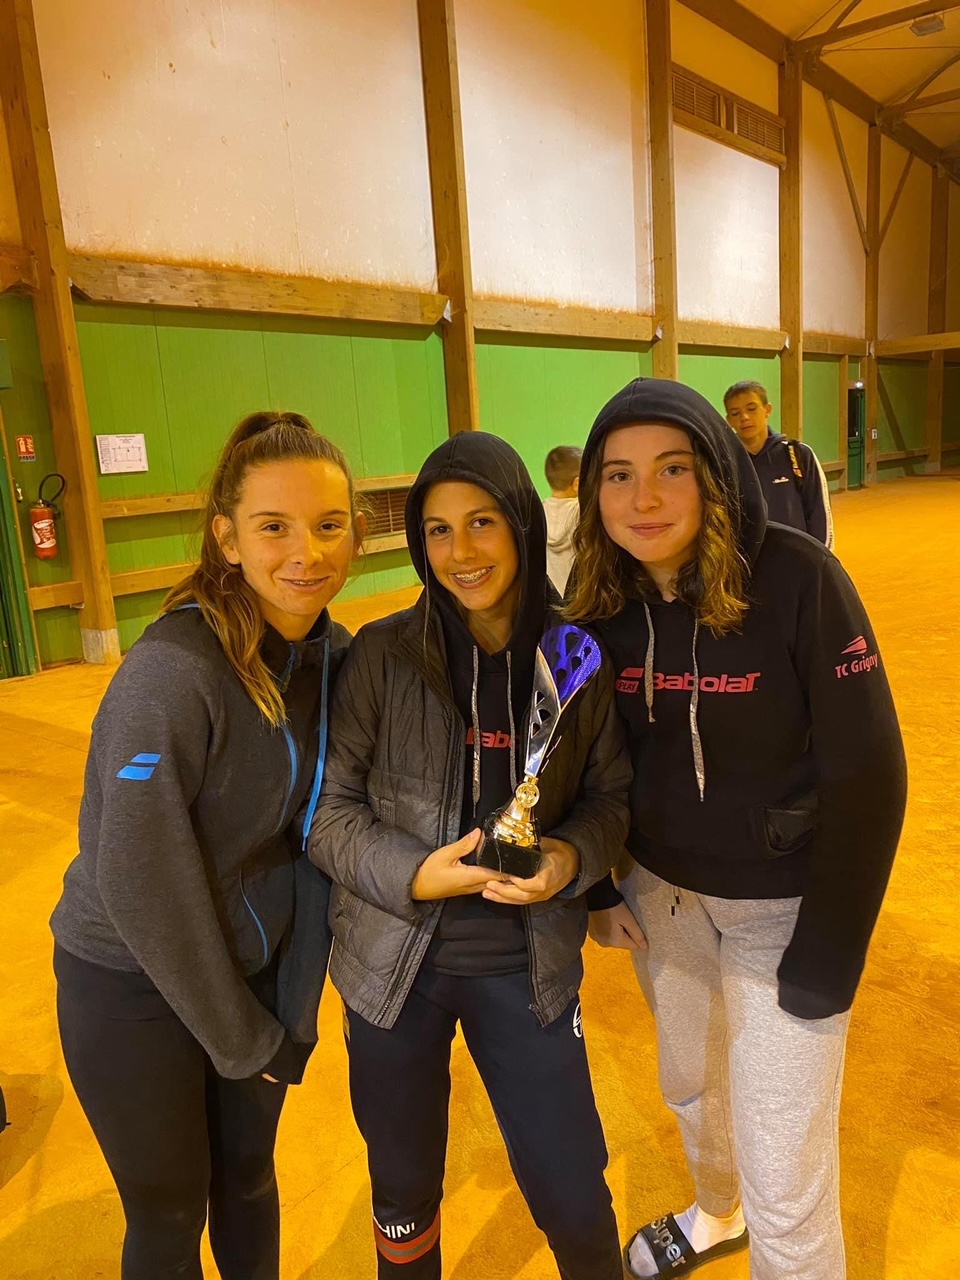 Image - Equipe fille 13/14 ans - Tennis Club Grigny